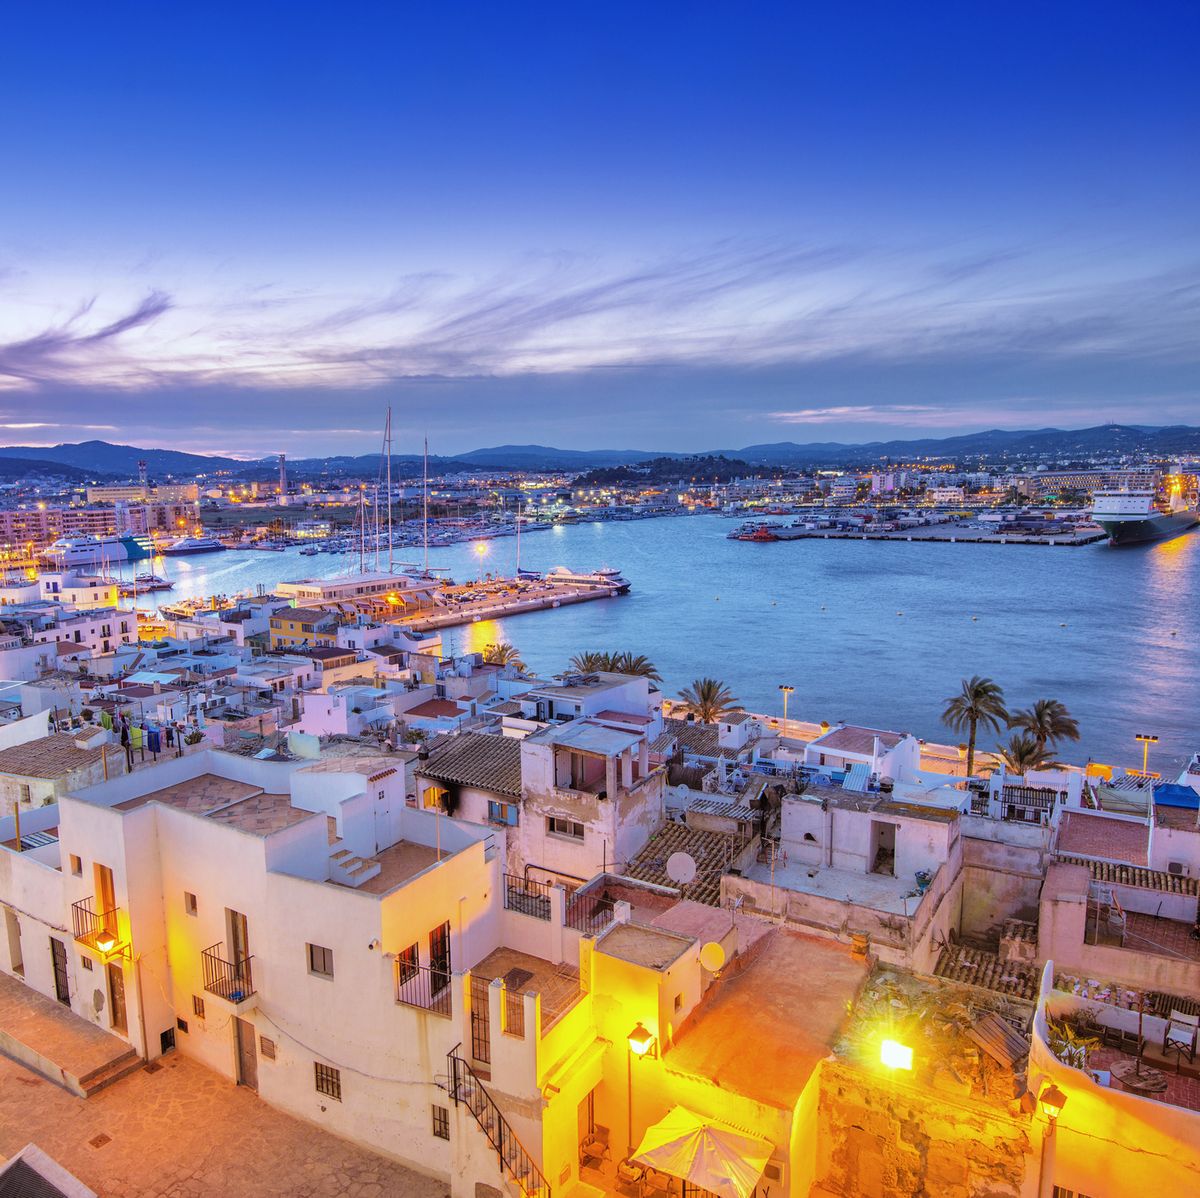 Ibiza Old Town and Harbour at dusk